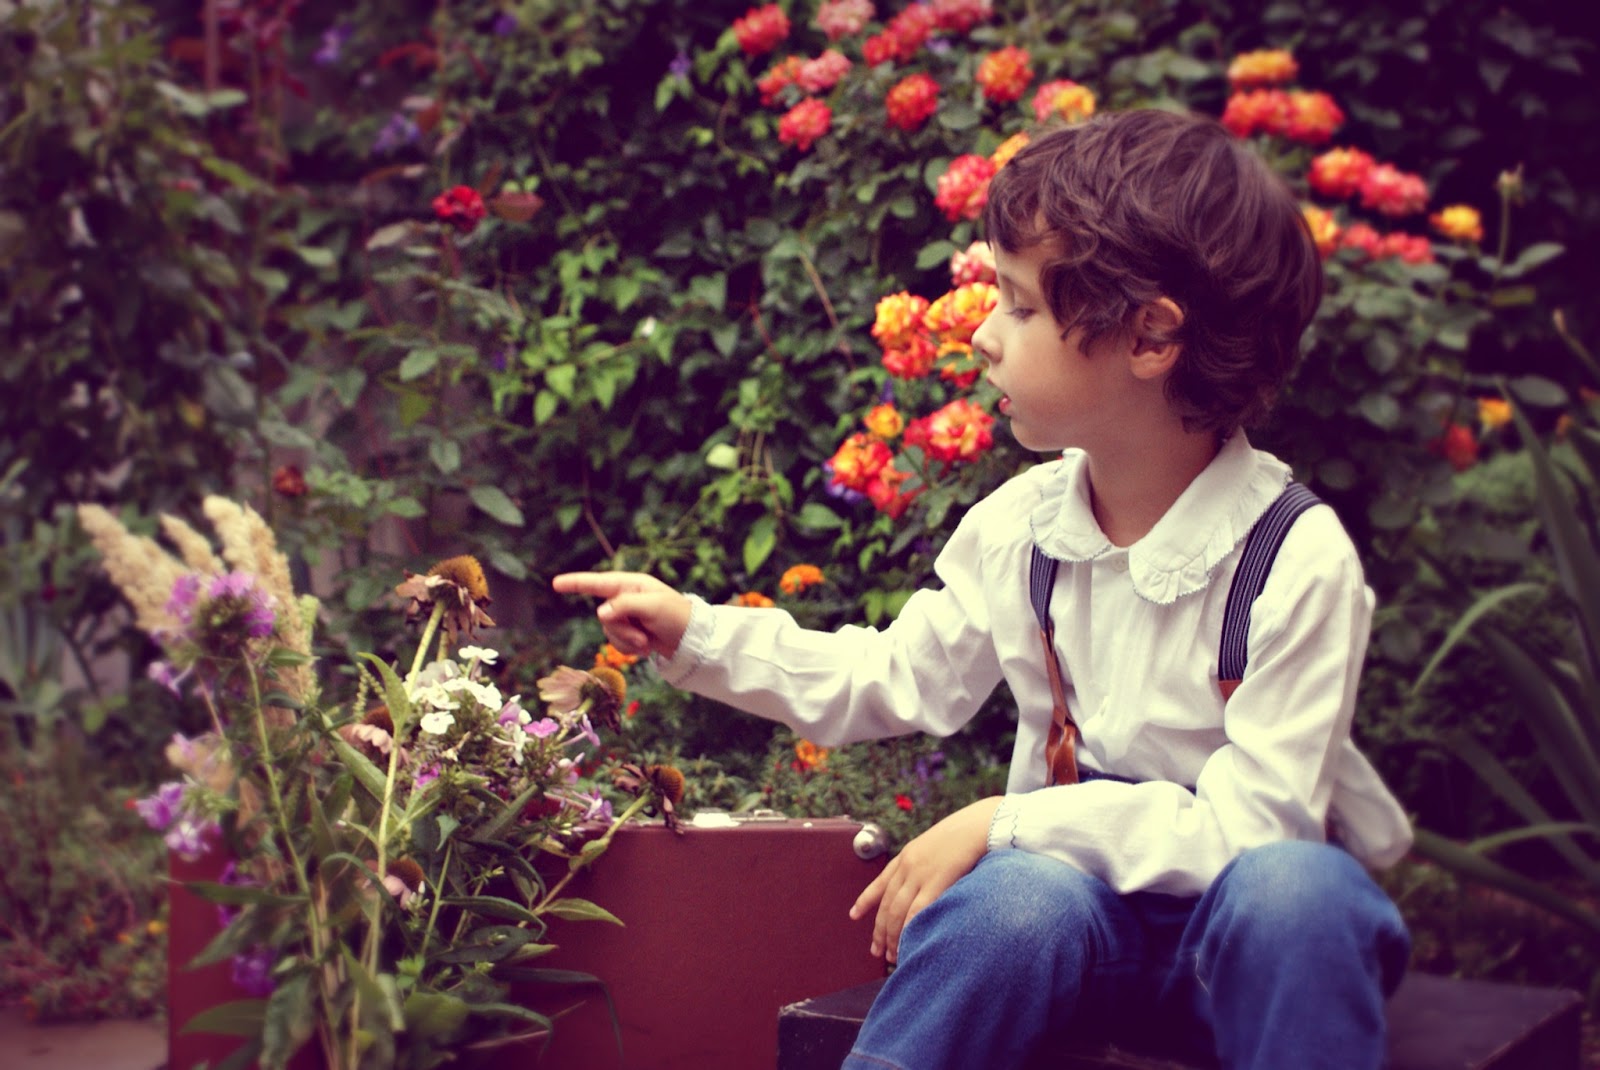 Young child counting flowers in a garden